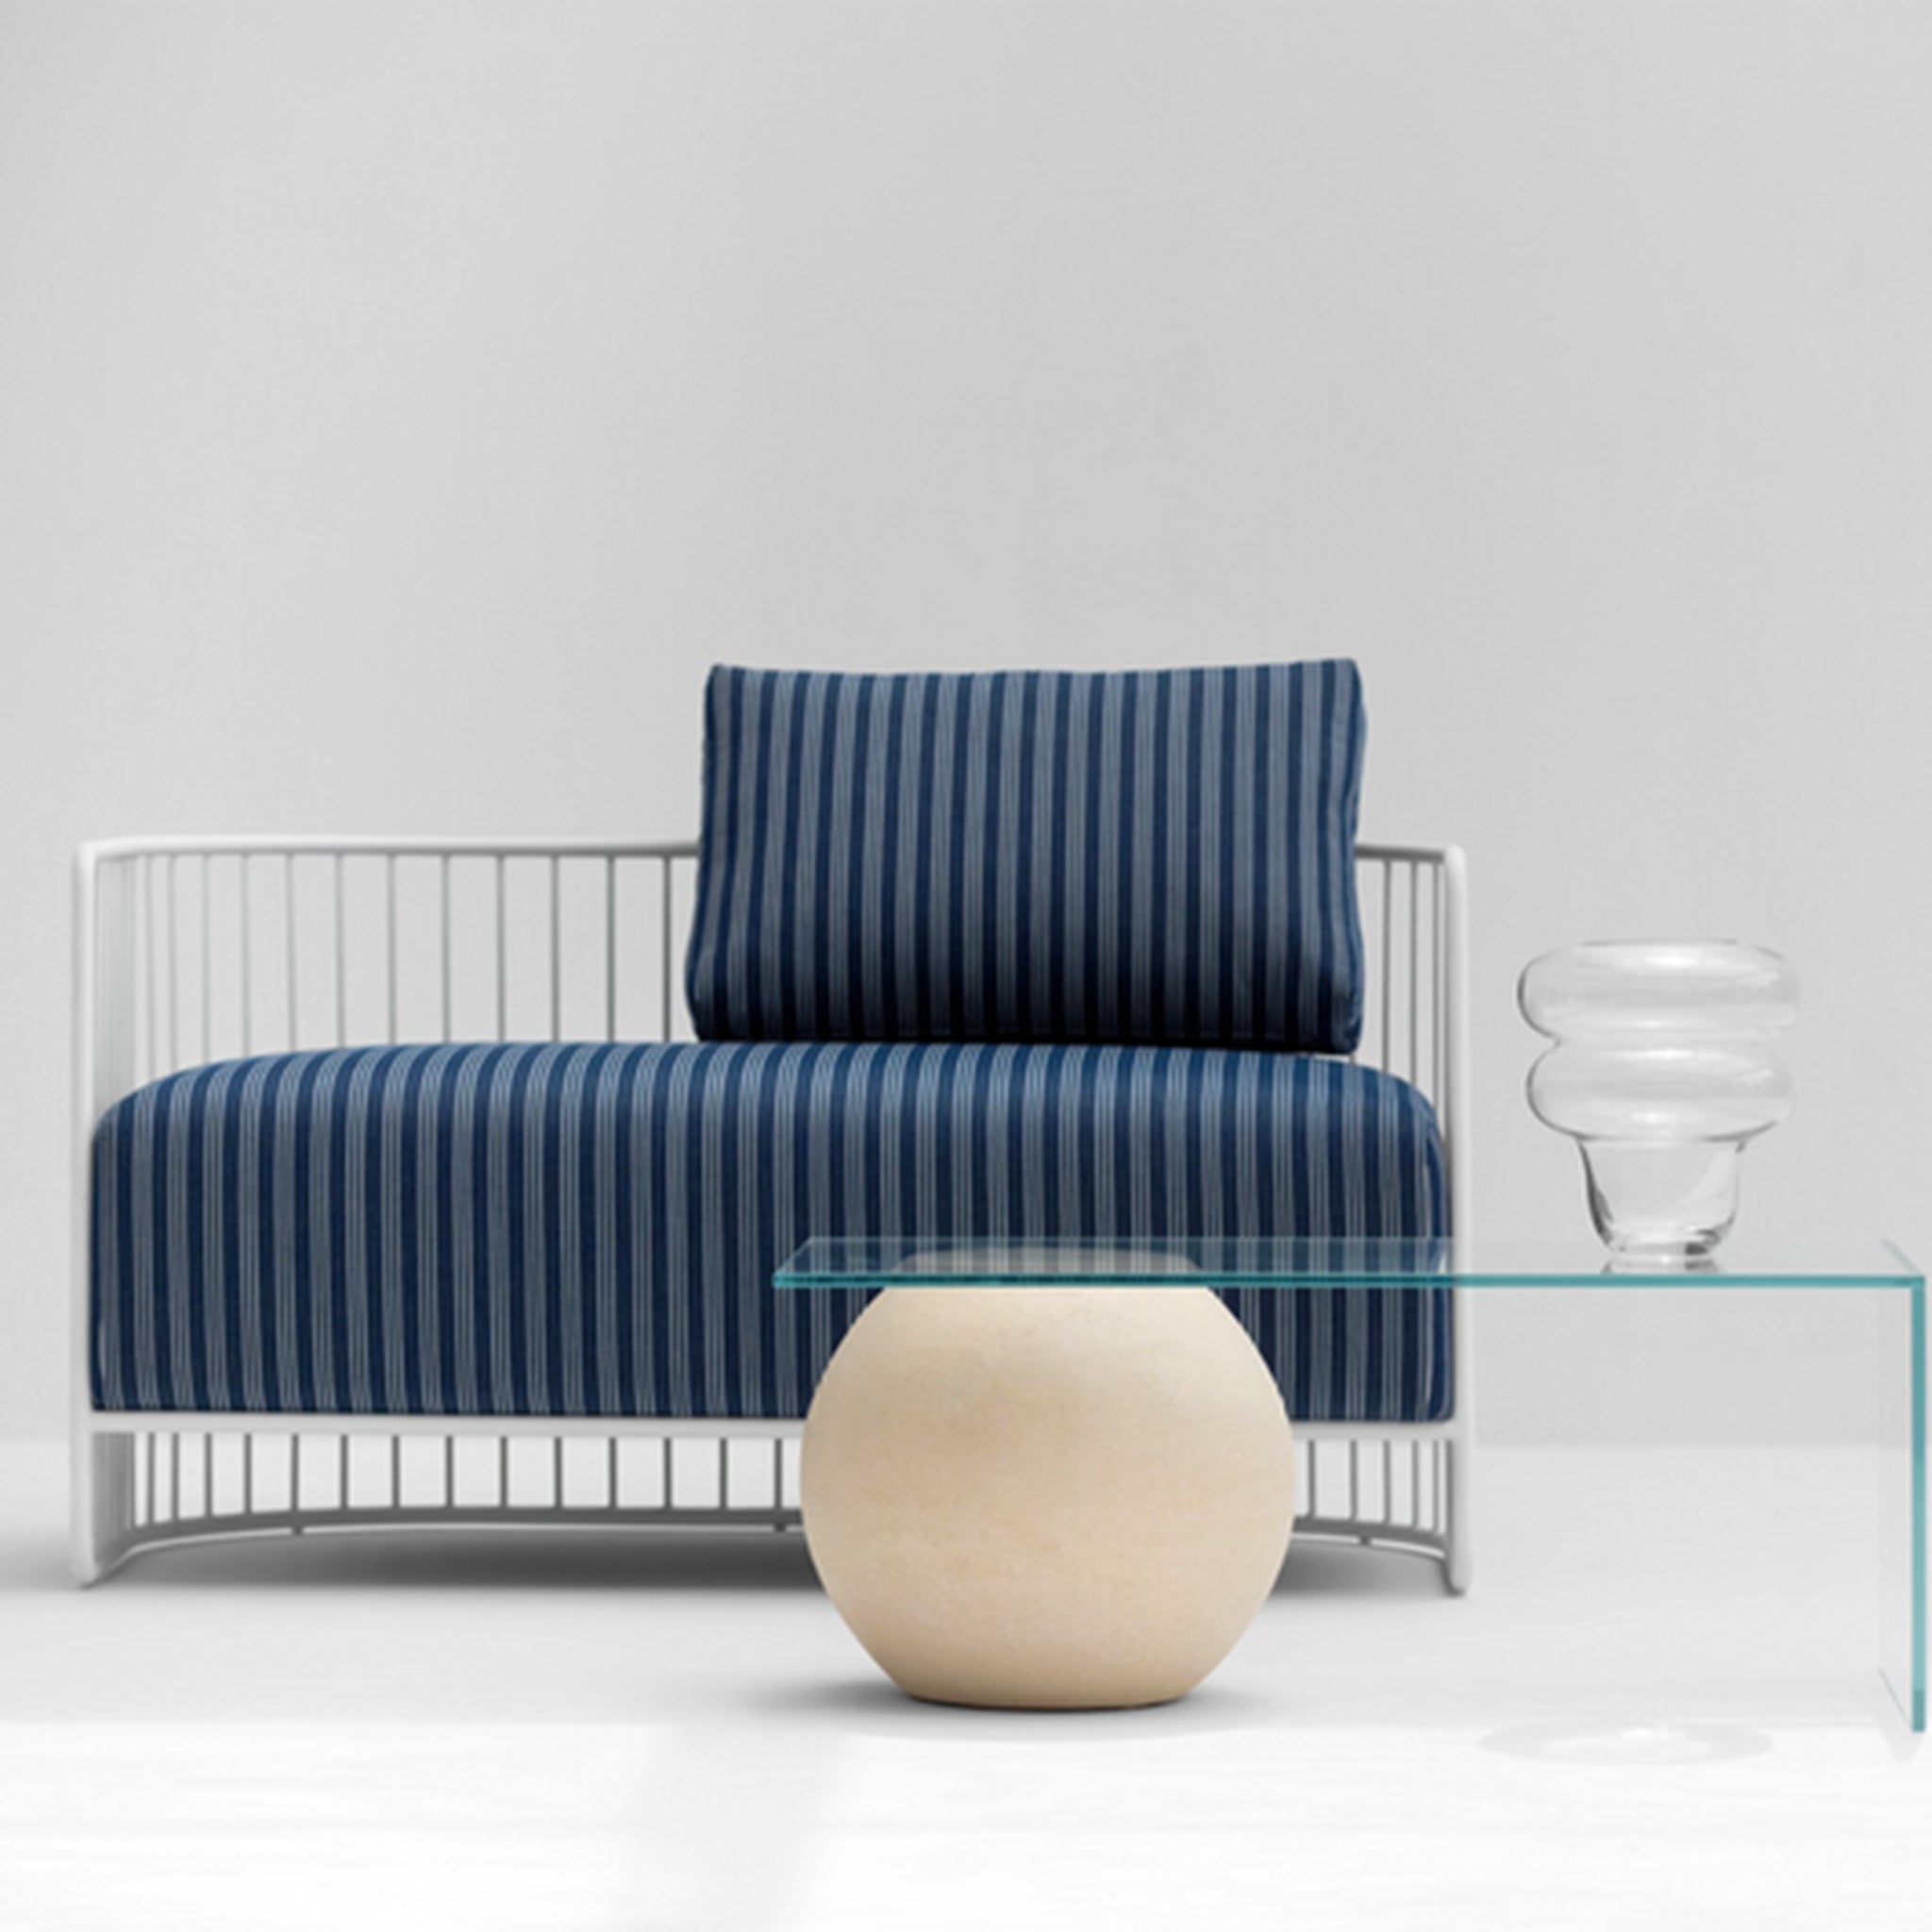 Front view of the Willa Outdoor Accent Chair showcasing its modern design with blue striped cushions and a white metal frame.